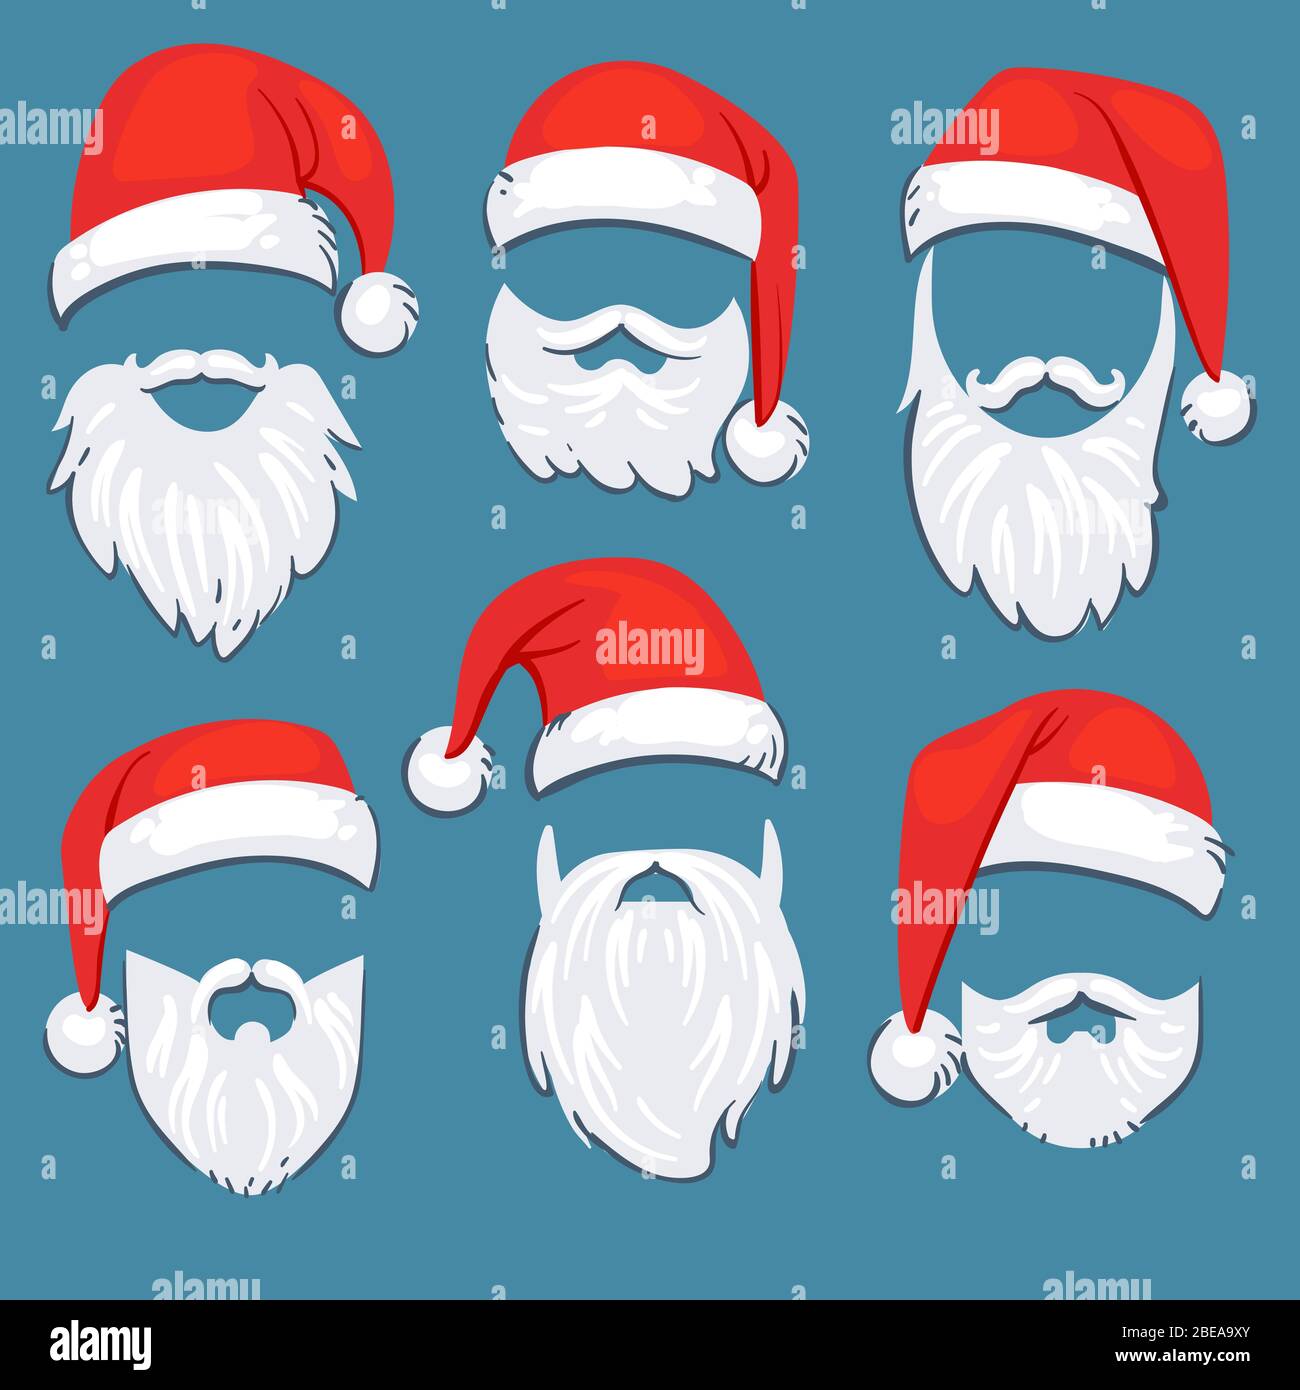 Christmas Santa Claus red hats with white moustache and beards vector set. Santa claus mask with beard for xmas holiday illustration Stock Vector